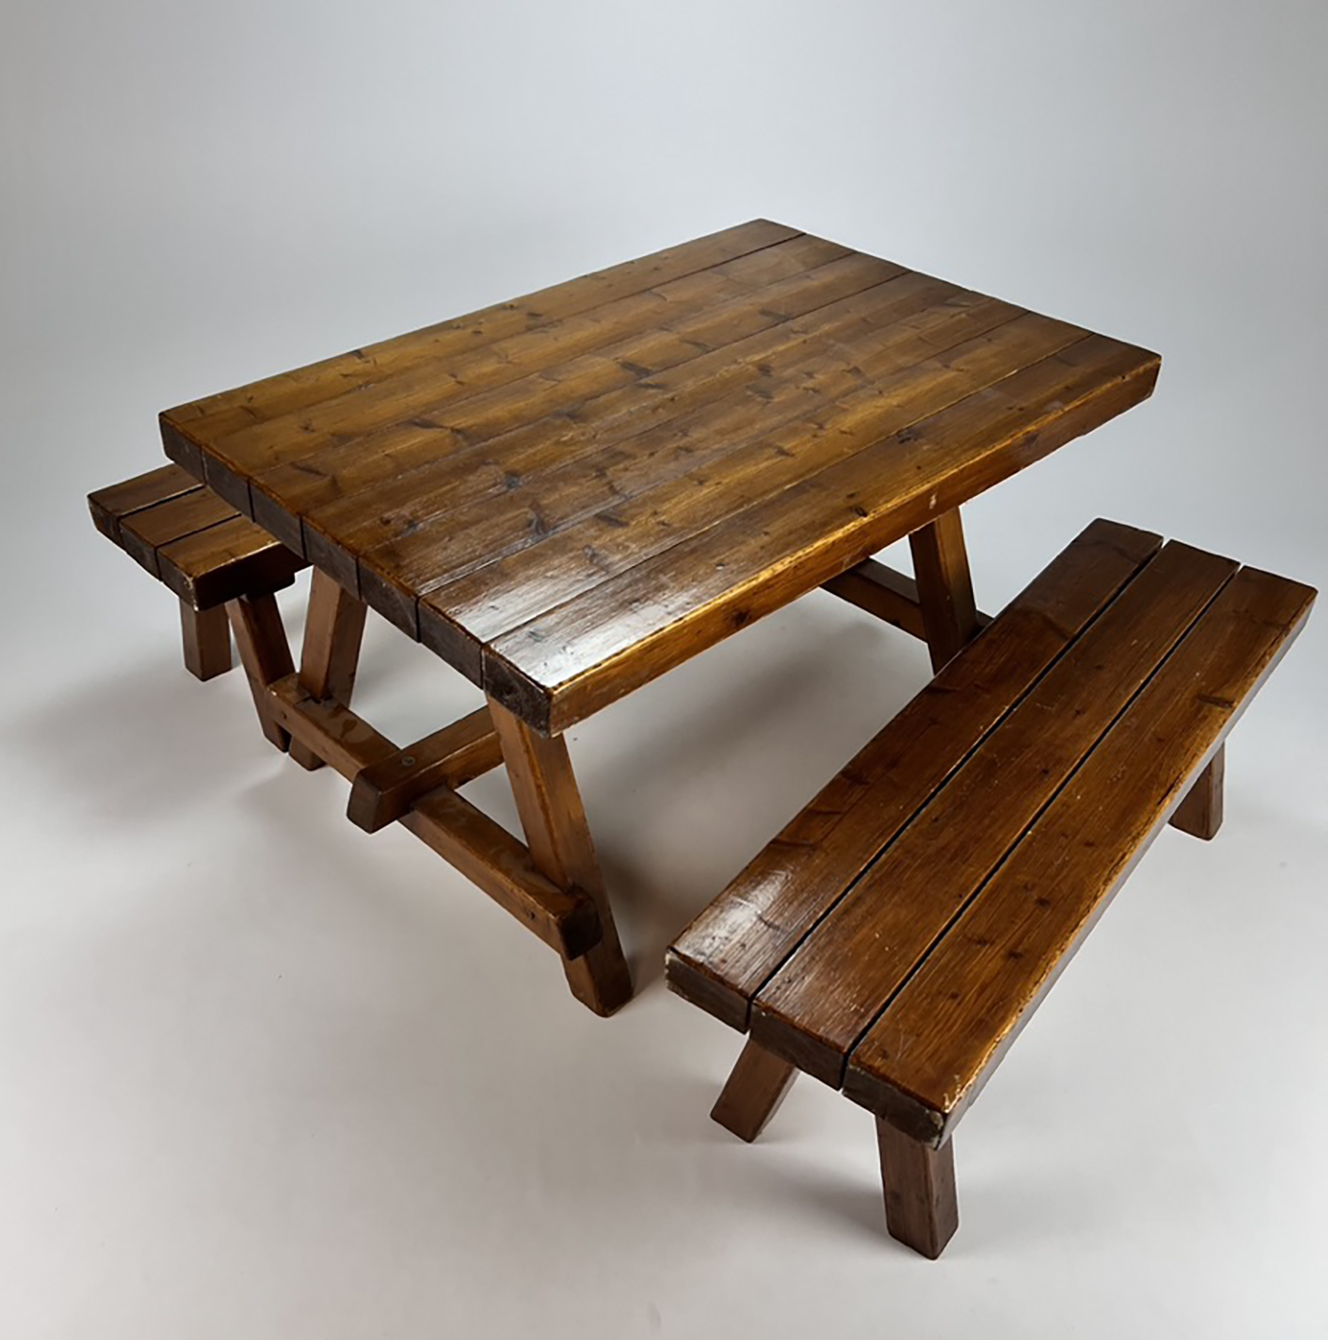 Pine set consists of a table and two benches, 1960s